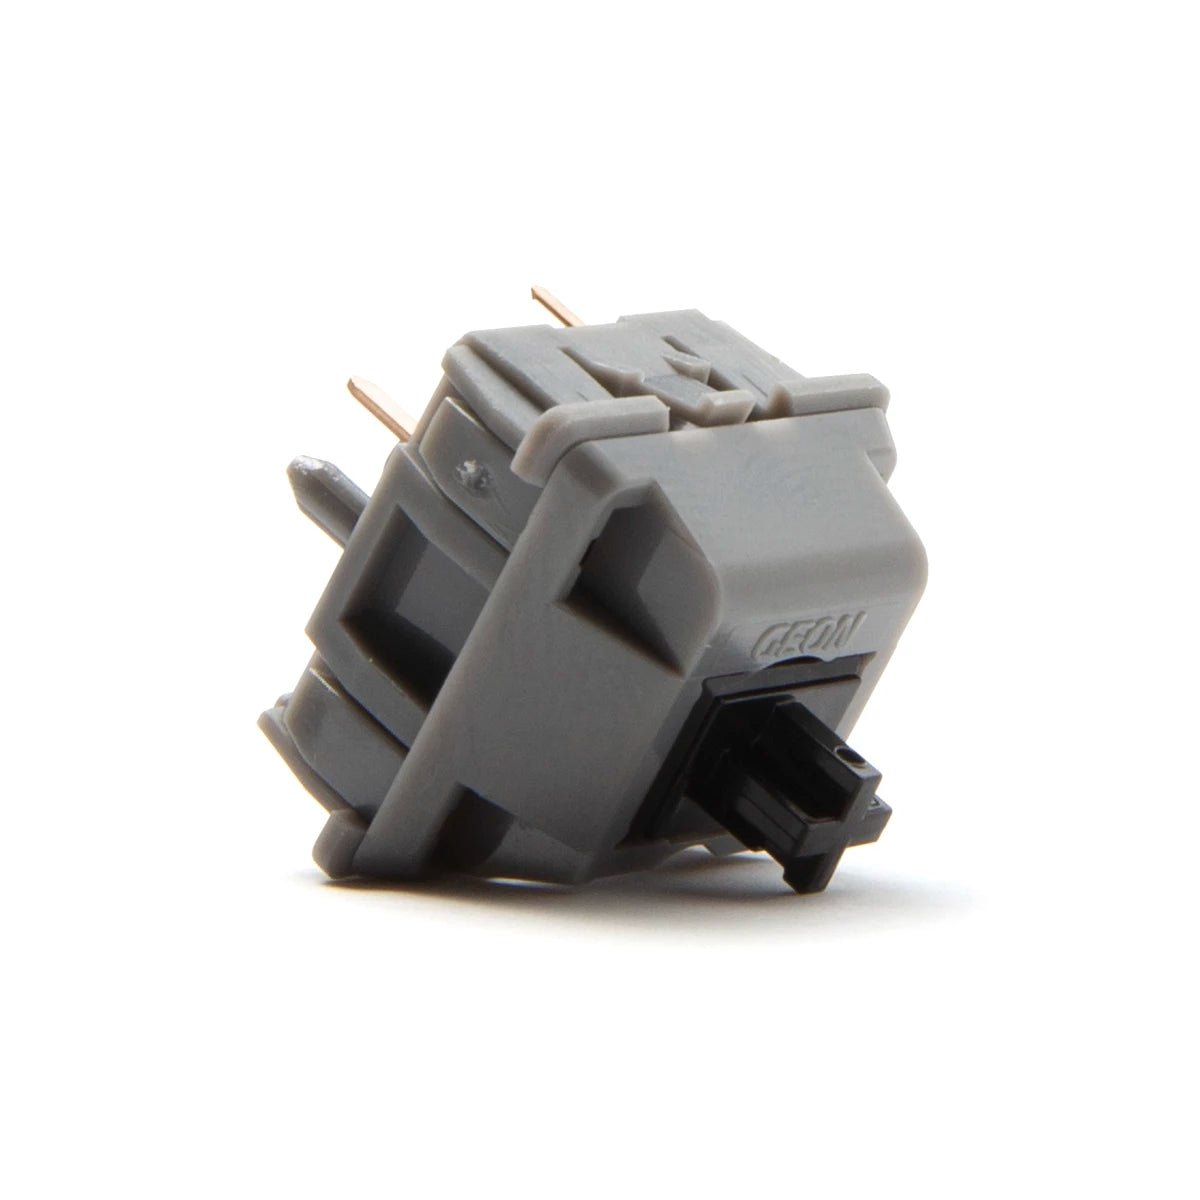 Geon Black Linear Switches - Divinikey